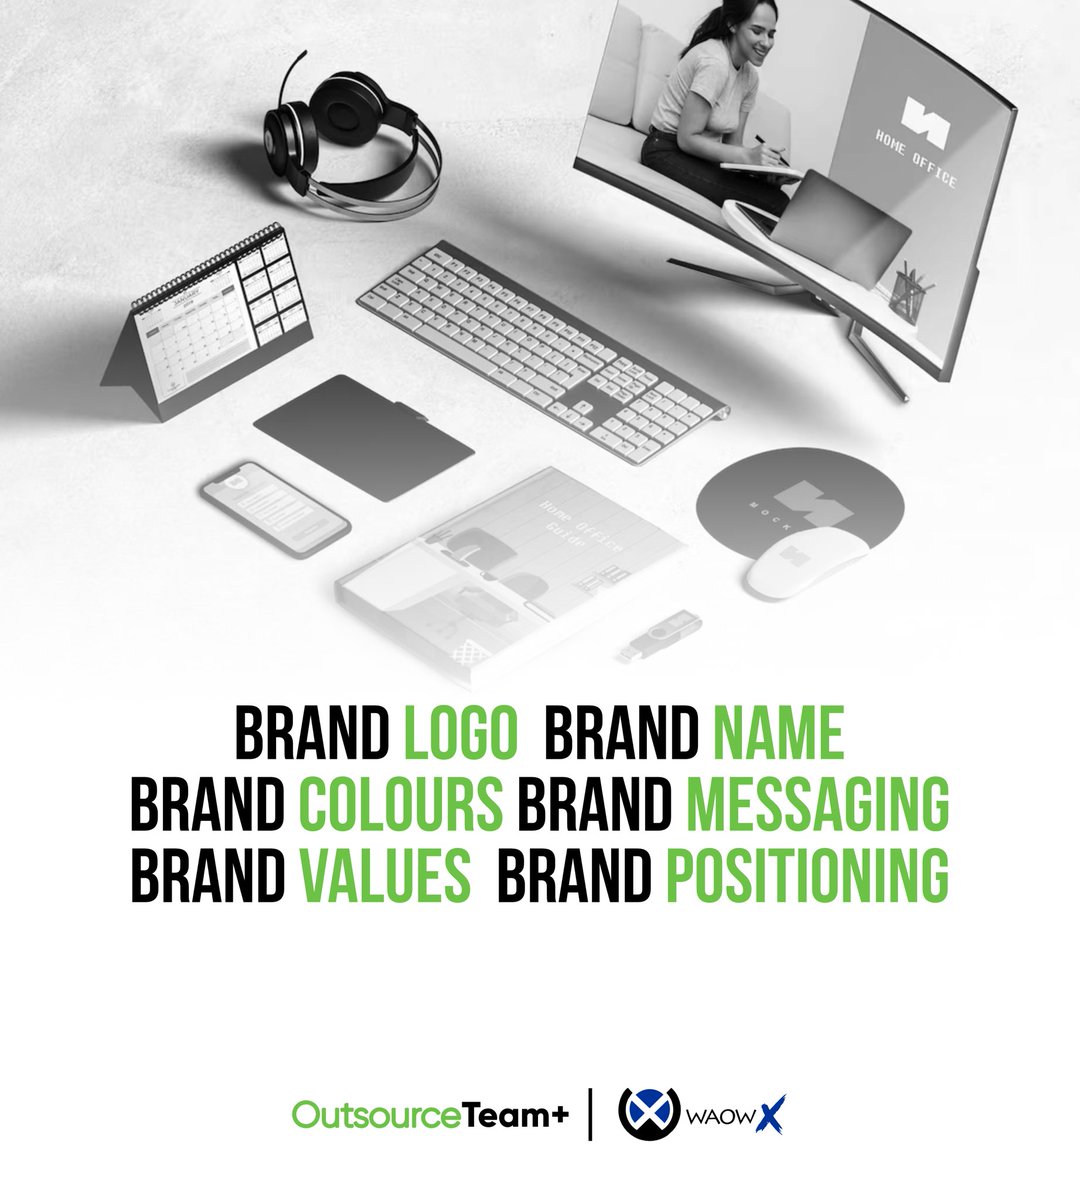 As a brand owner, you must be aware of these important elements to ensure sustainability, good image, and visibility of the business #waowxinnovations #abujadigitalmarketing #branding #advertising